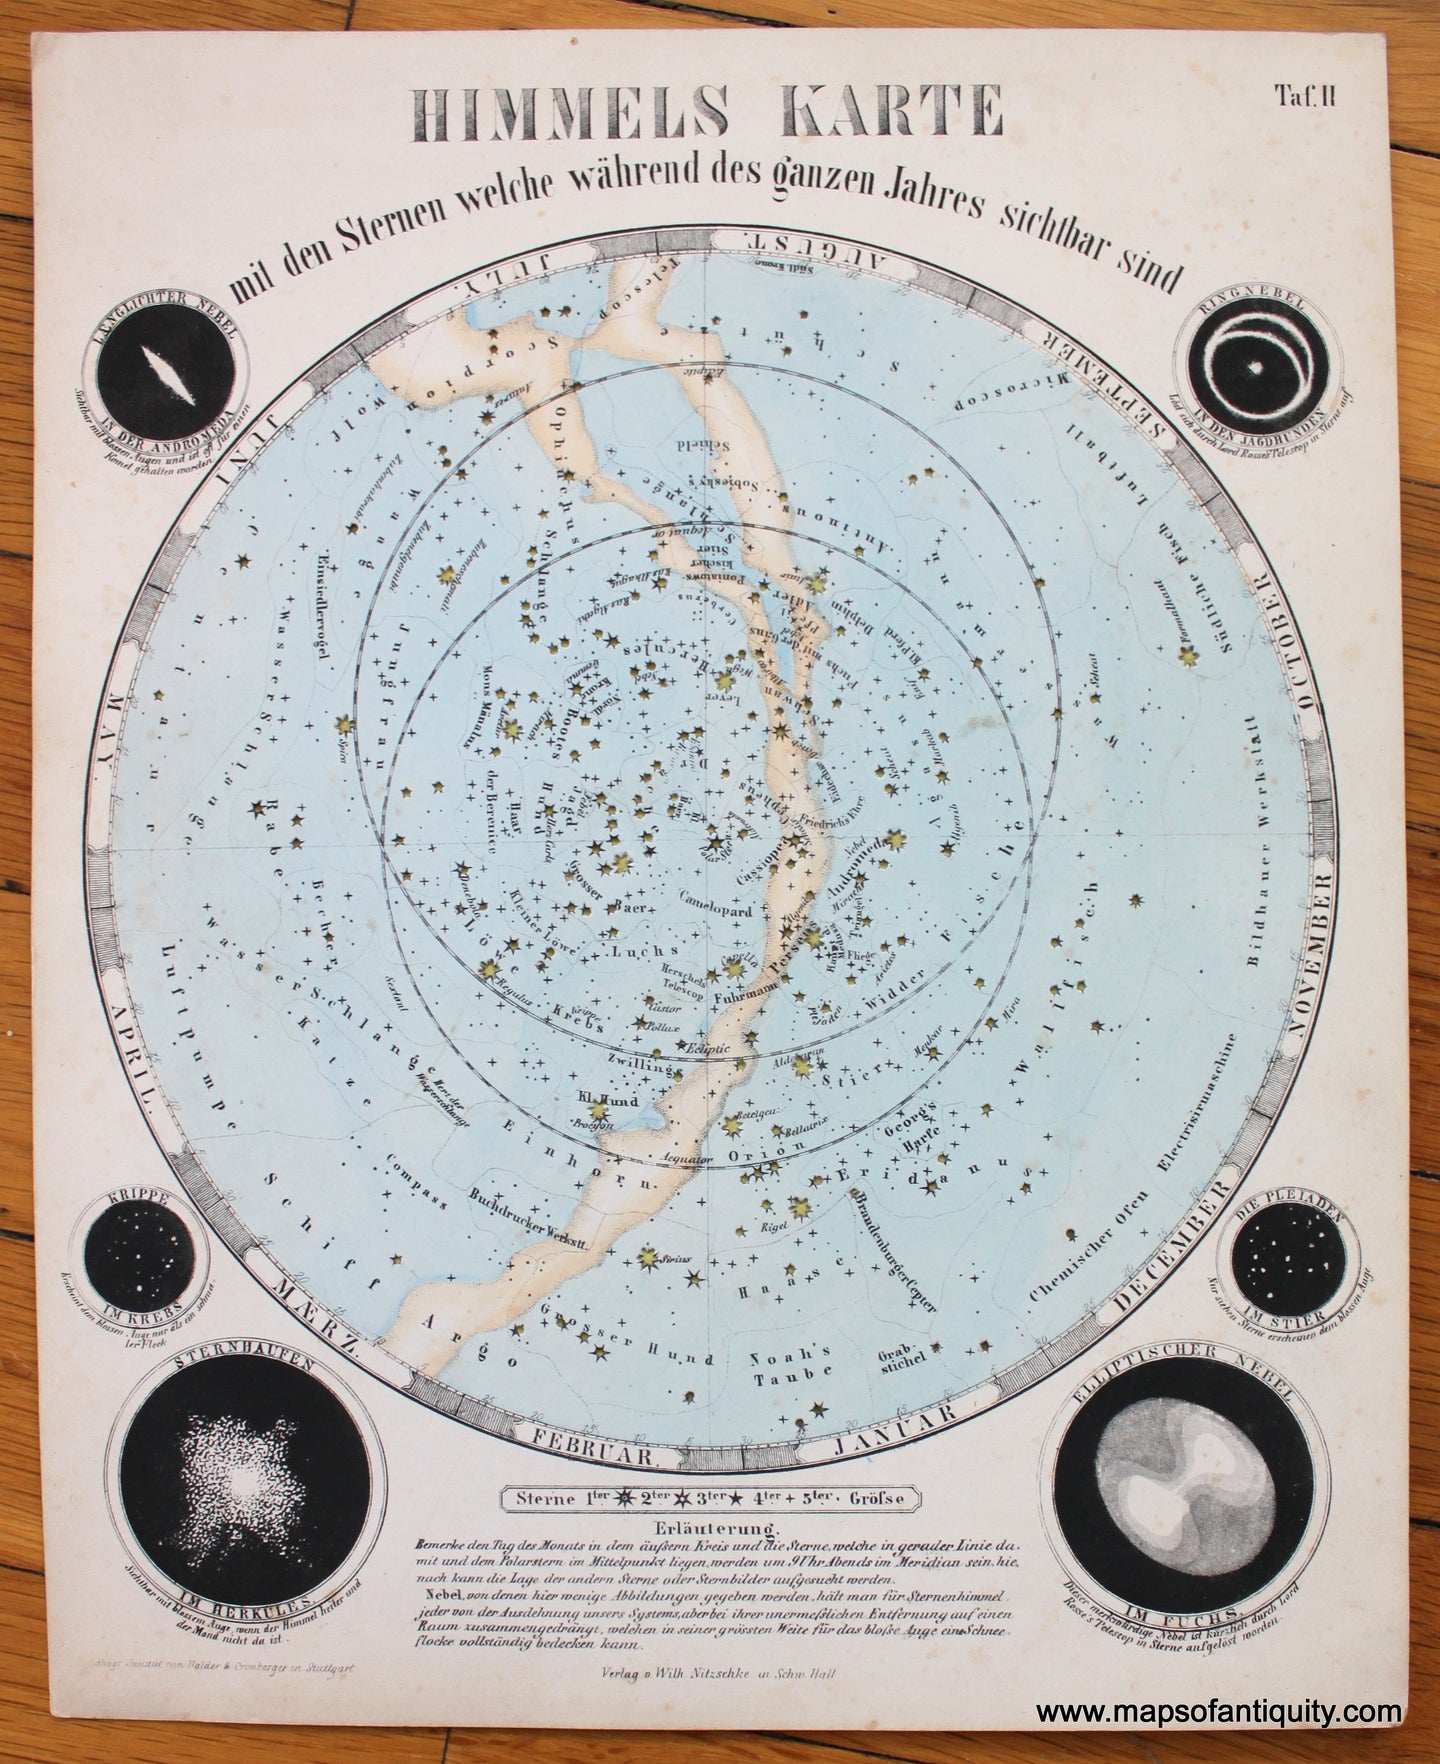 Antique-Map-Himmels-Karte-Celestial-map-with-stars-Map-of-the-Heavens-Wilhelm-Nitzchke-1851-hold-to-light-1850s-1800s-19th-century-Maps-of-Antiquity